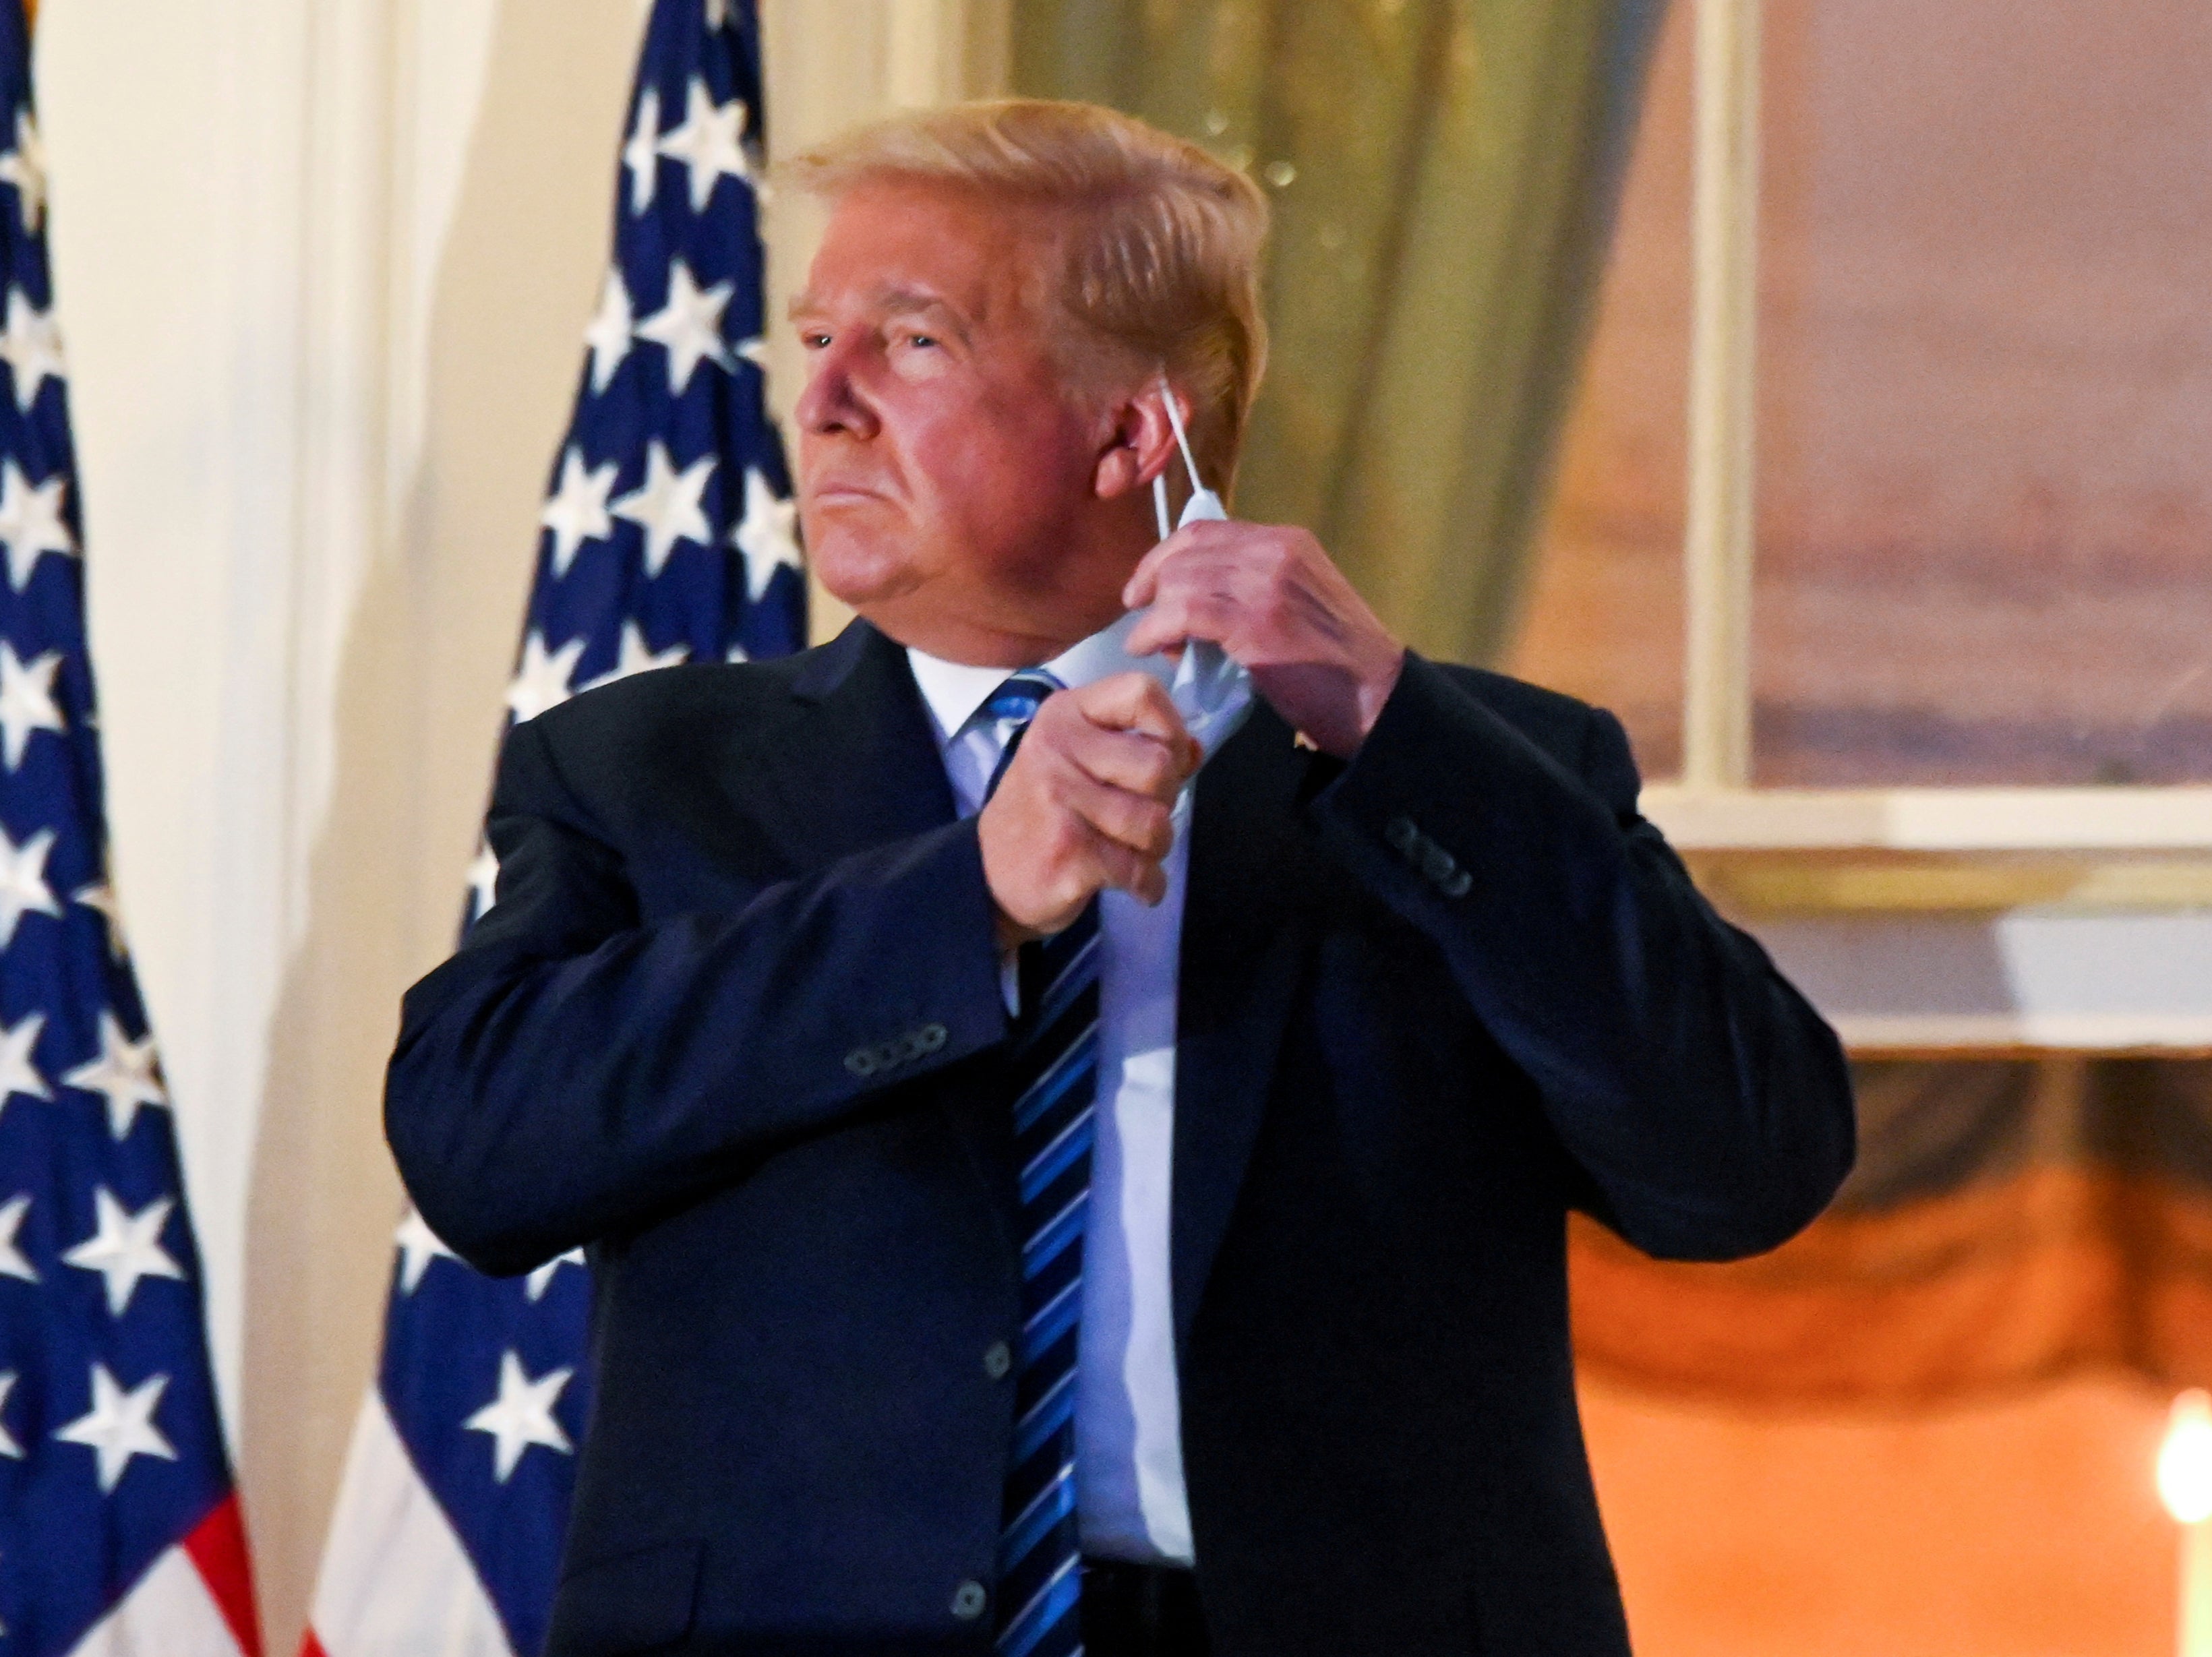 Donald Trump pulls off his protective face mask at the White House after returning from Covid treatment at Walter Reed Medical Center on 5 October, 2020